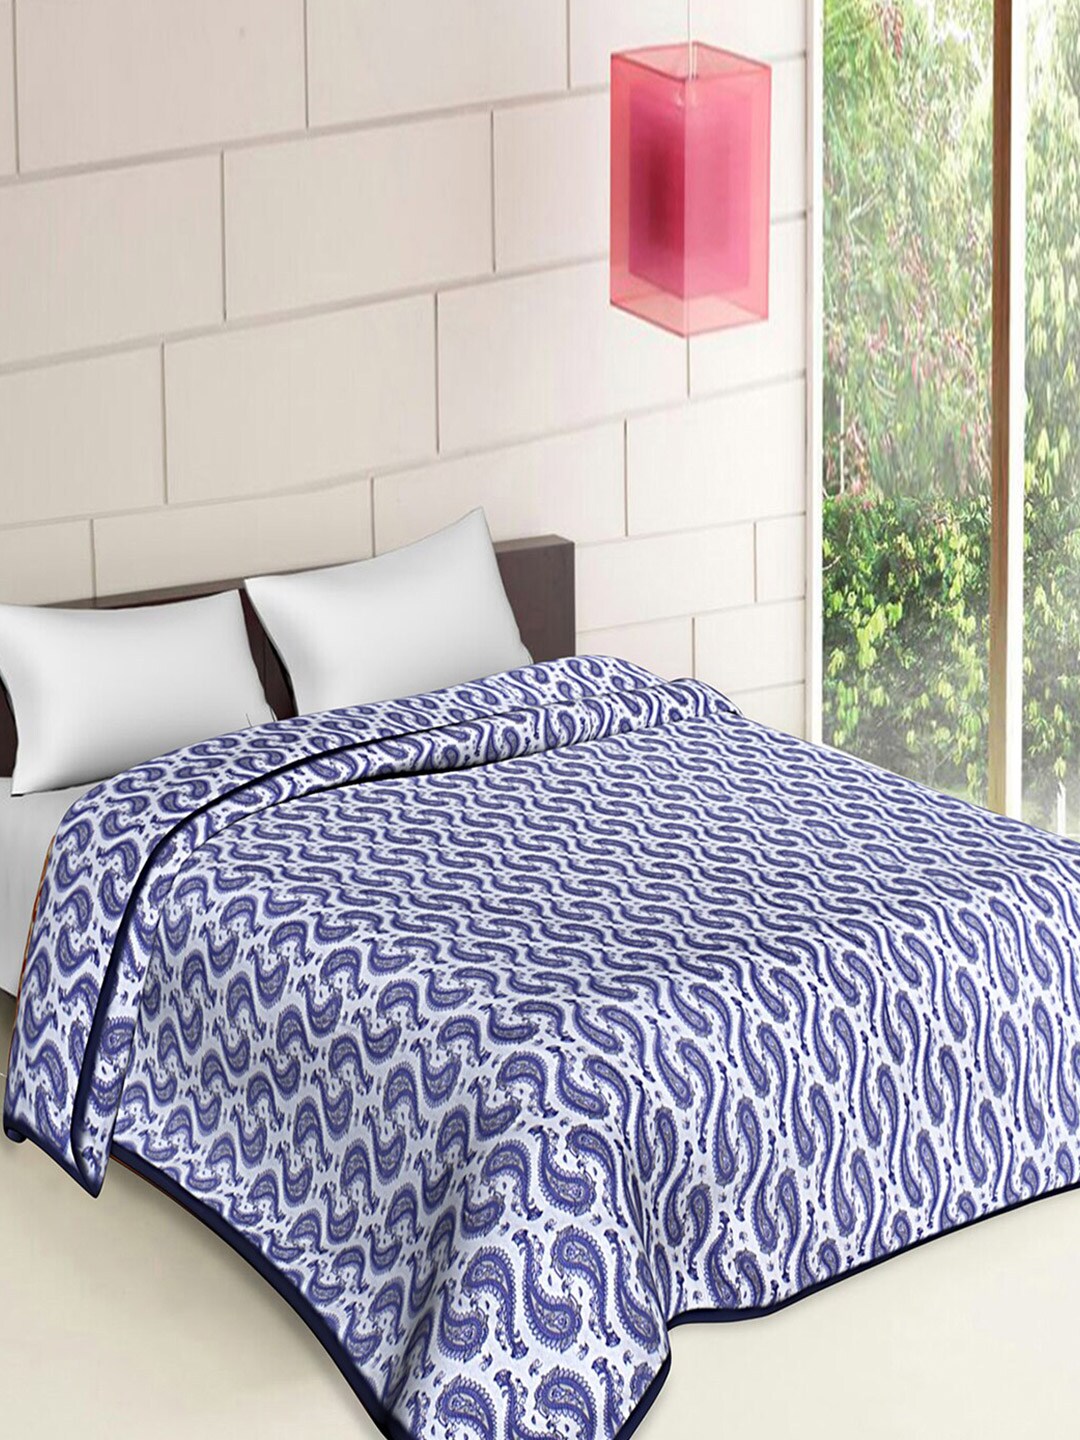 Kuber Industries Blue & White Ethnic Motifs AC Room 300 GSM Cotton Double Bed Blanket Price in India